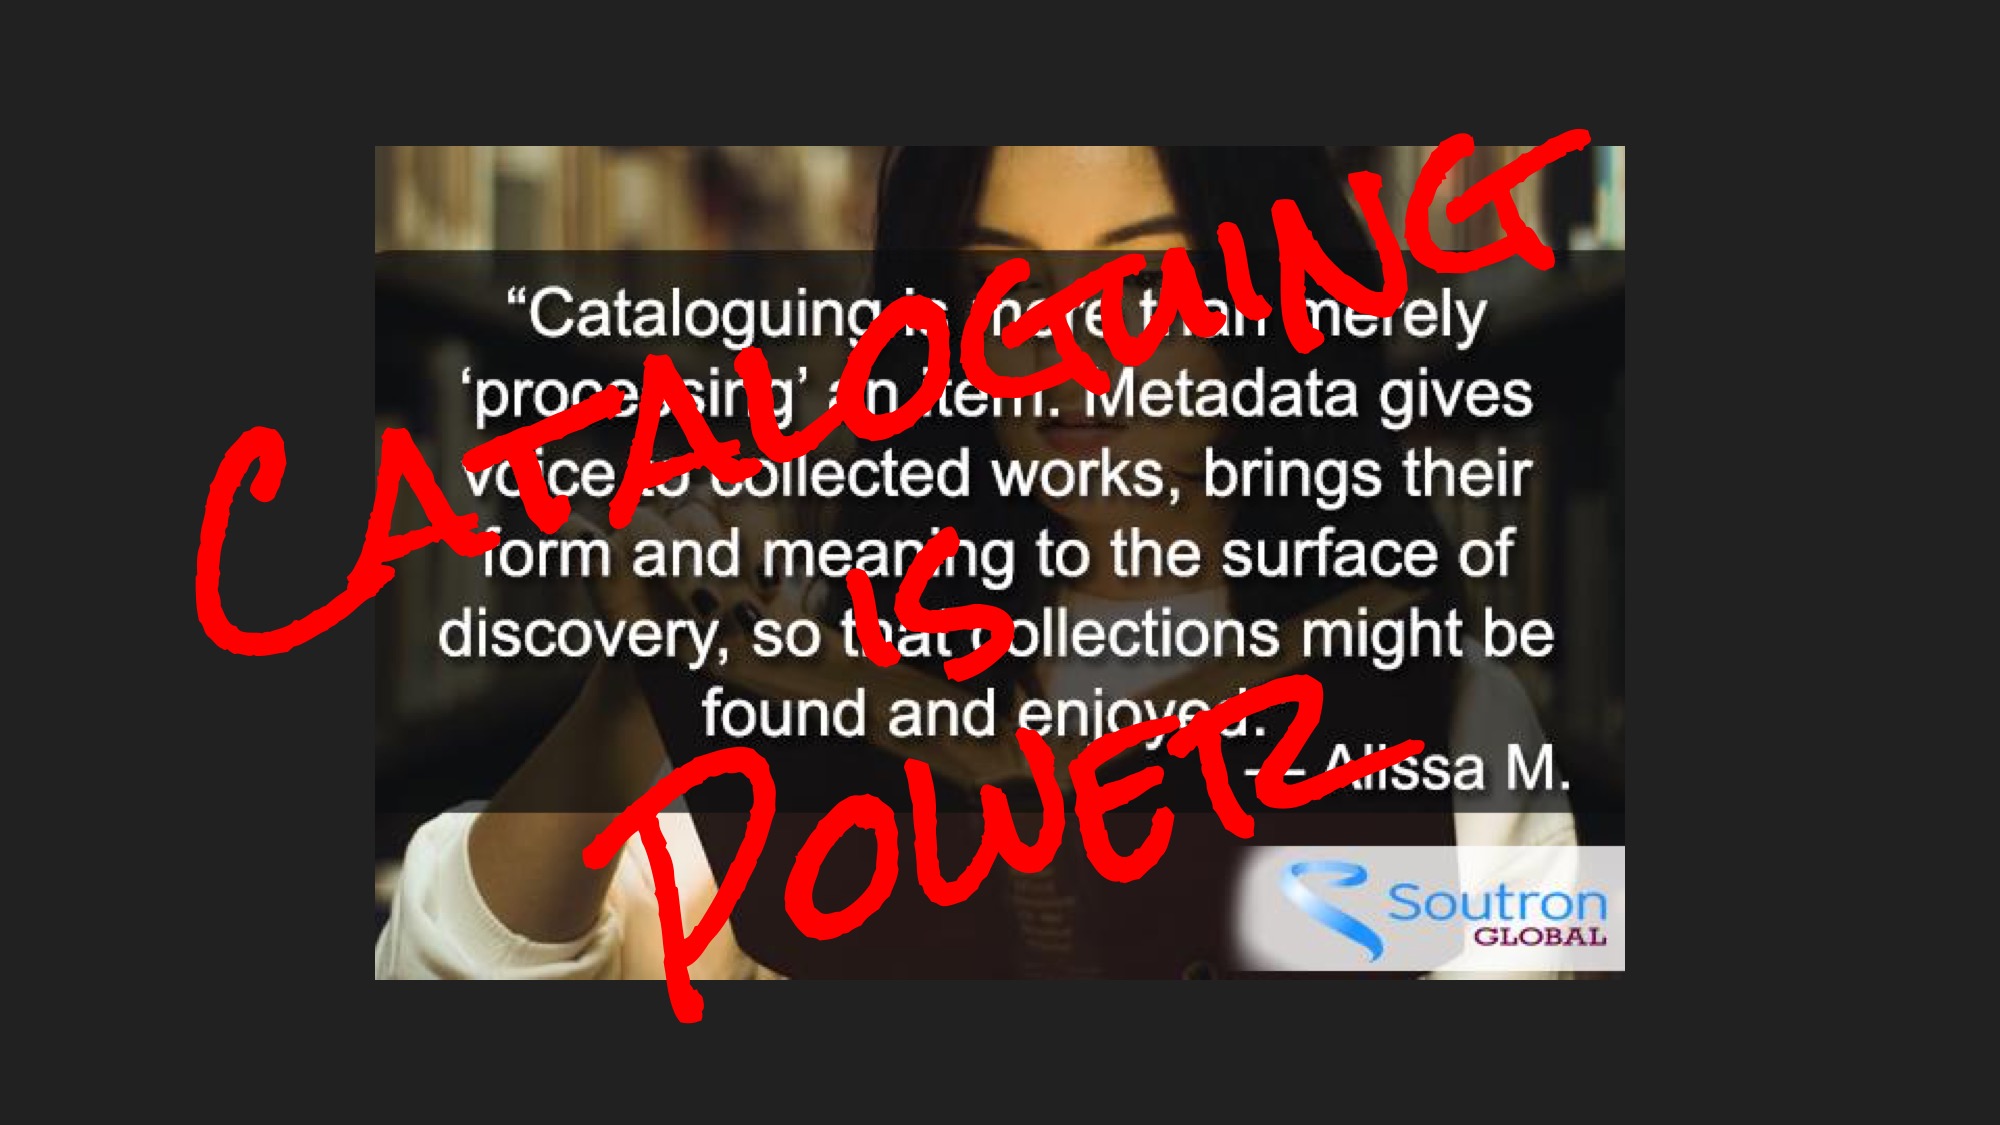 Same image as the previous slide, but with the words 'CATALOGUING IS POWER' superimposed in red graffiti font